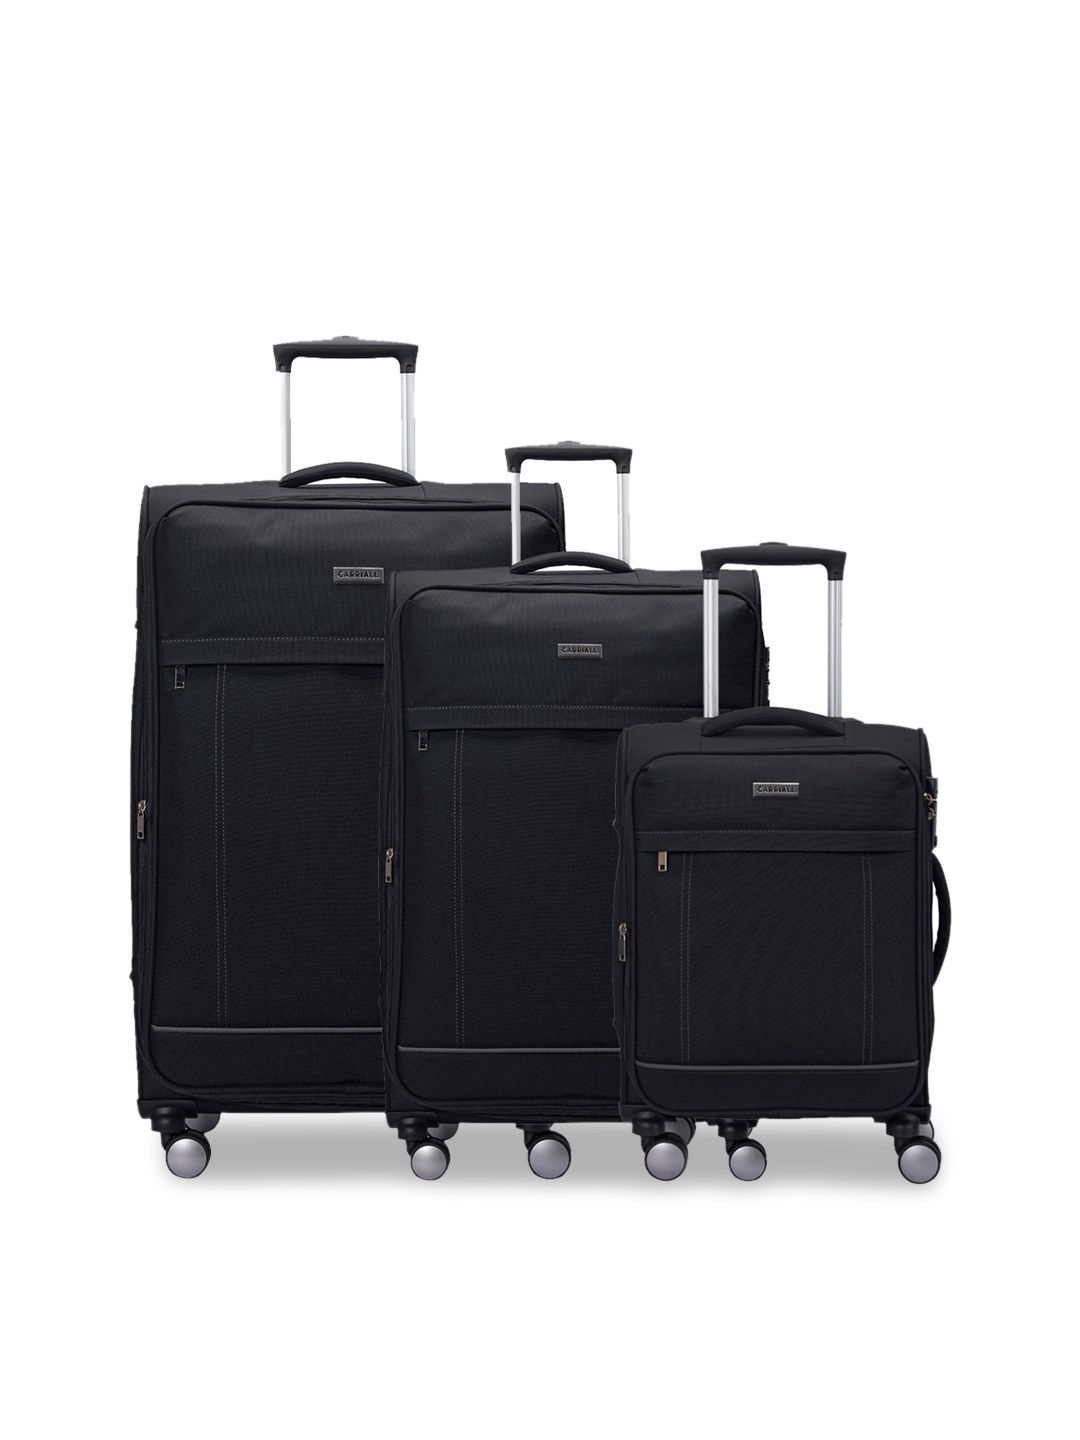 CARRIALL Set Of 3 Black Solid Soft-Sided Trolley Bags Price in India